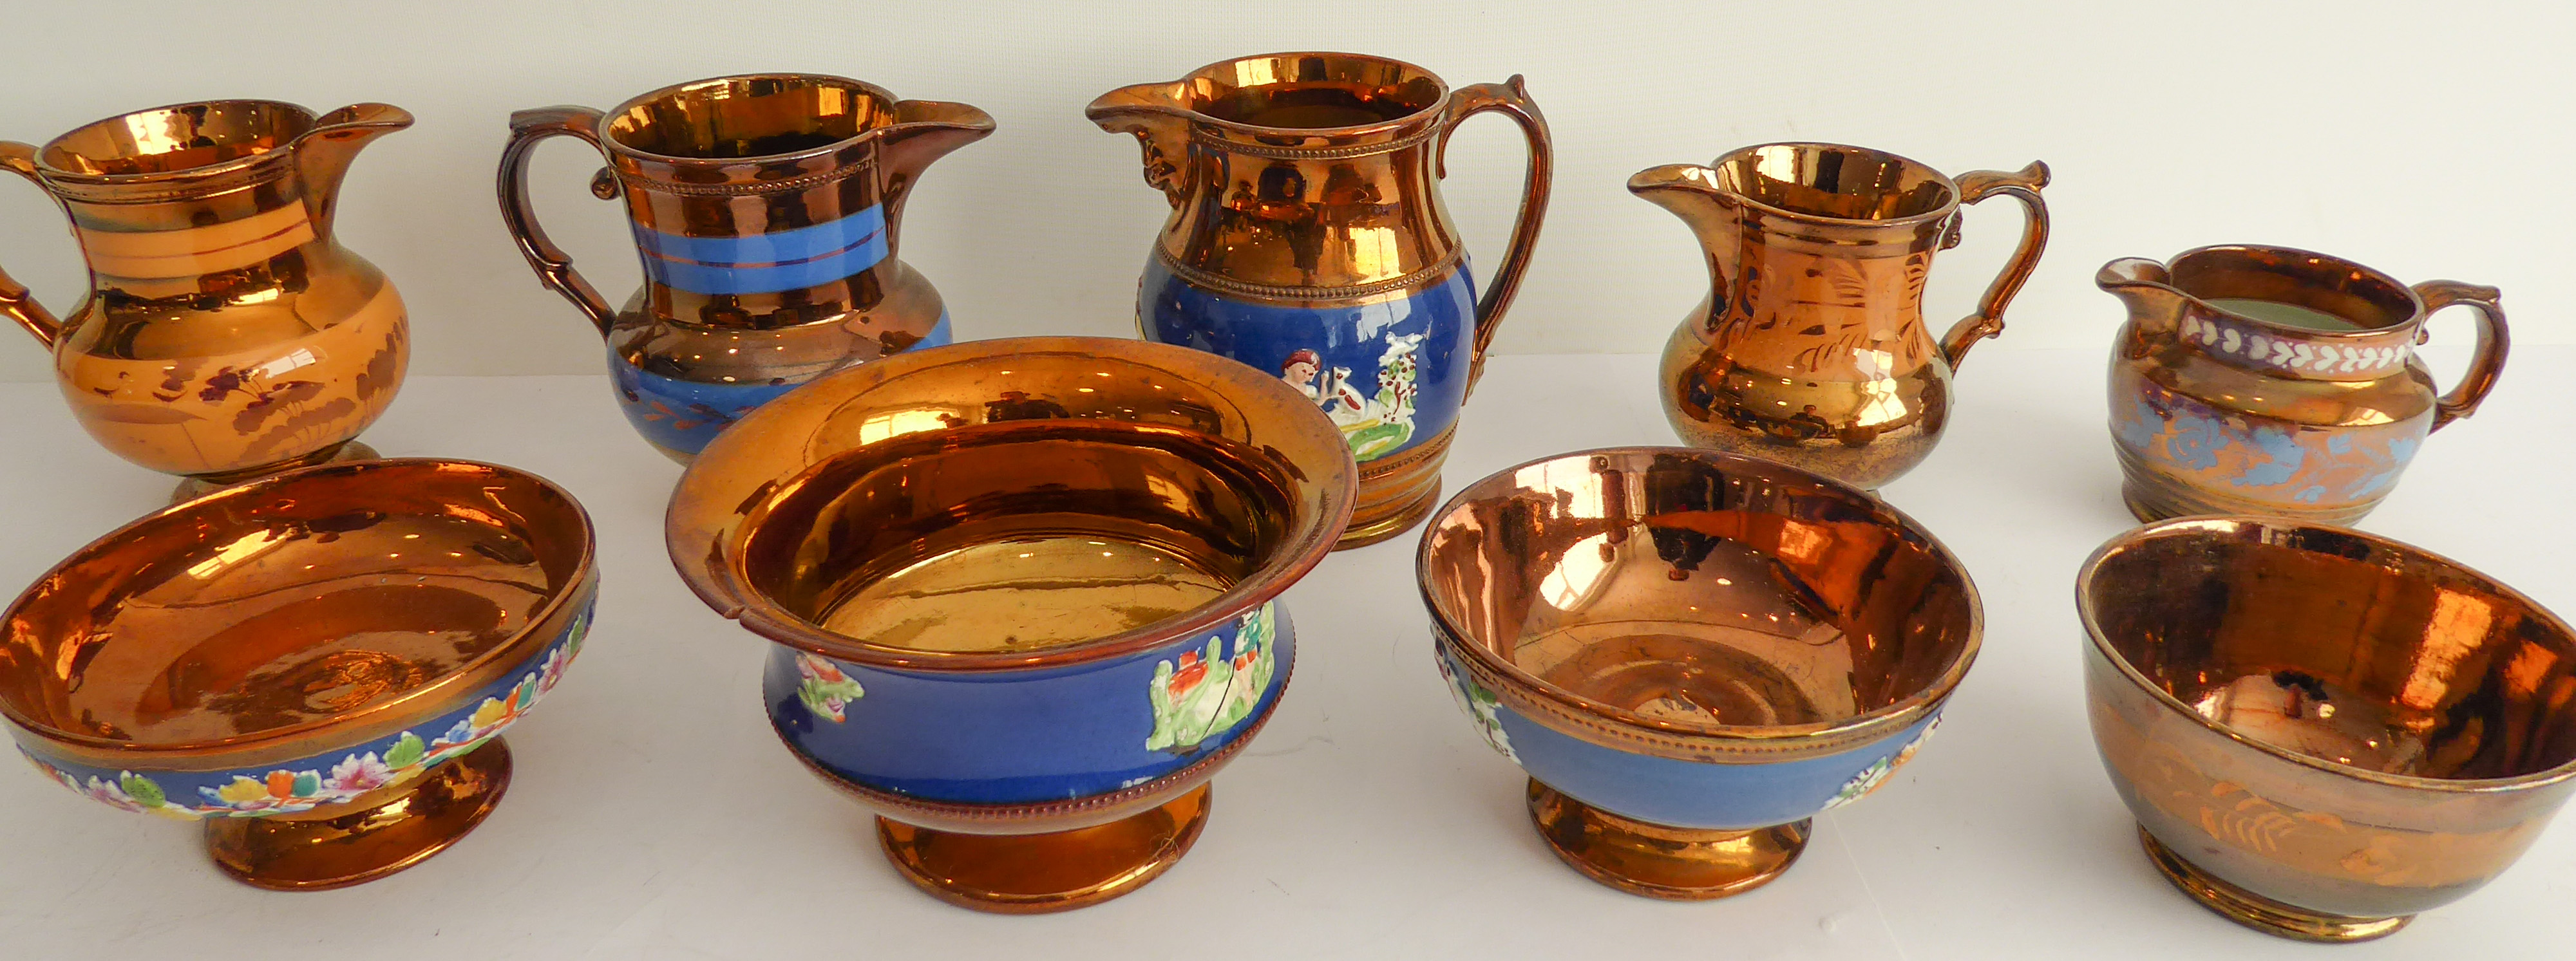 A selection of 19th century Welsh-style copper lustre comprising five jugs (the largest being 15